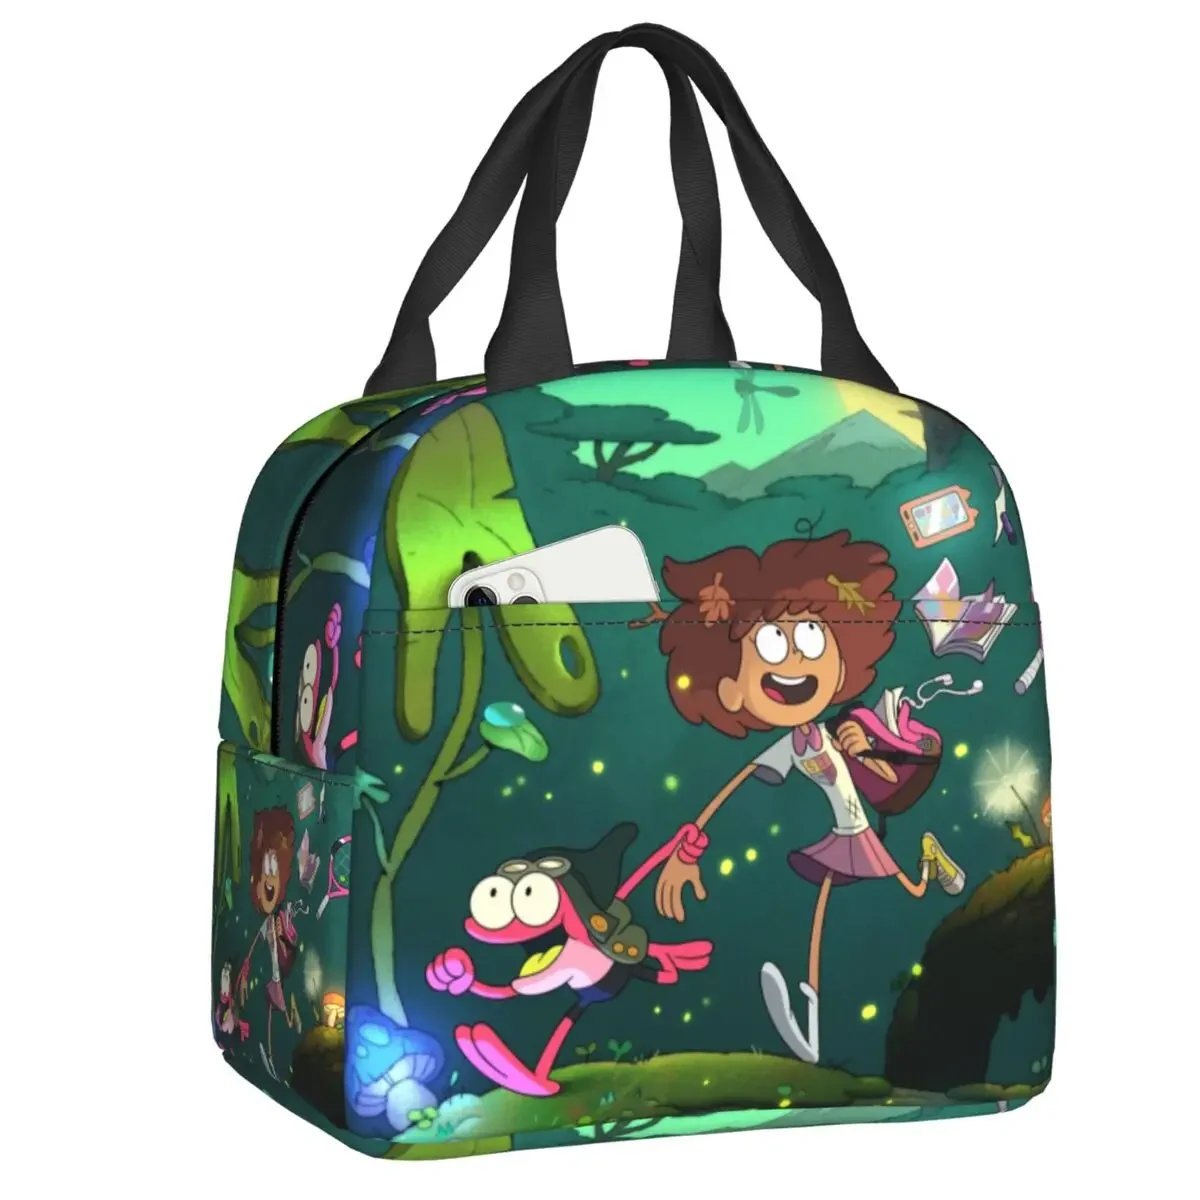 

Amphibia Anne Boonchu Resuable Lunch Box Multifunction Comic Anime Manga Cooler Thermal Food Insulated Lunch Bag School Children